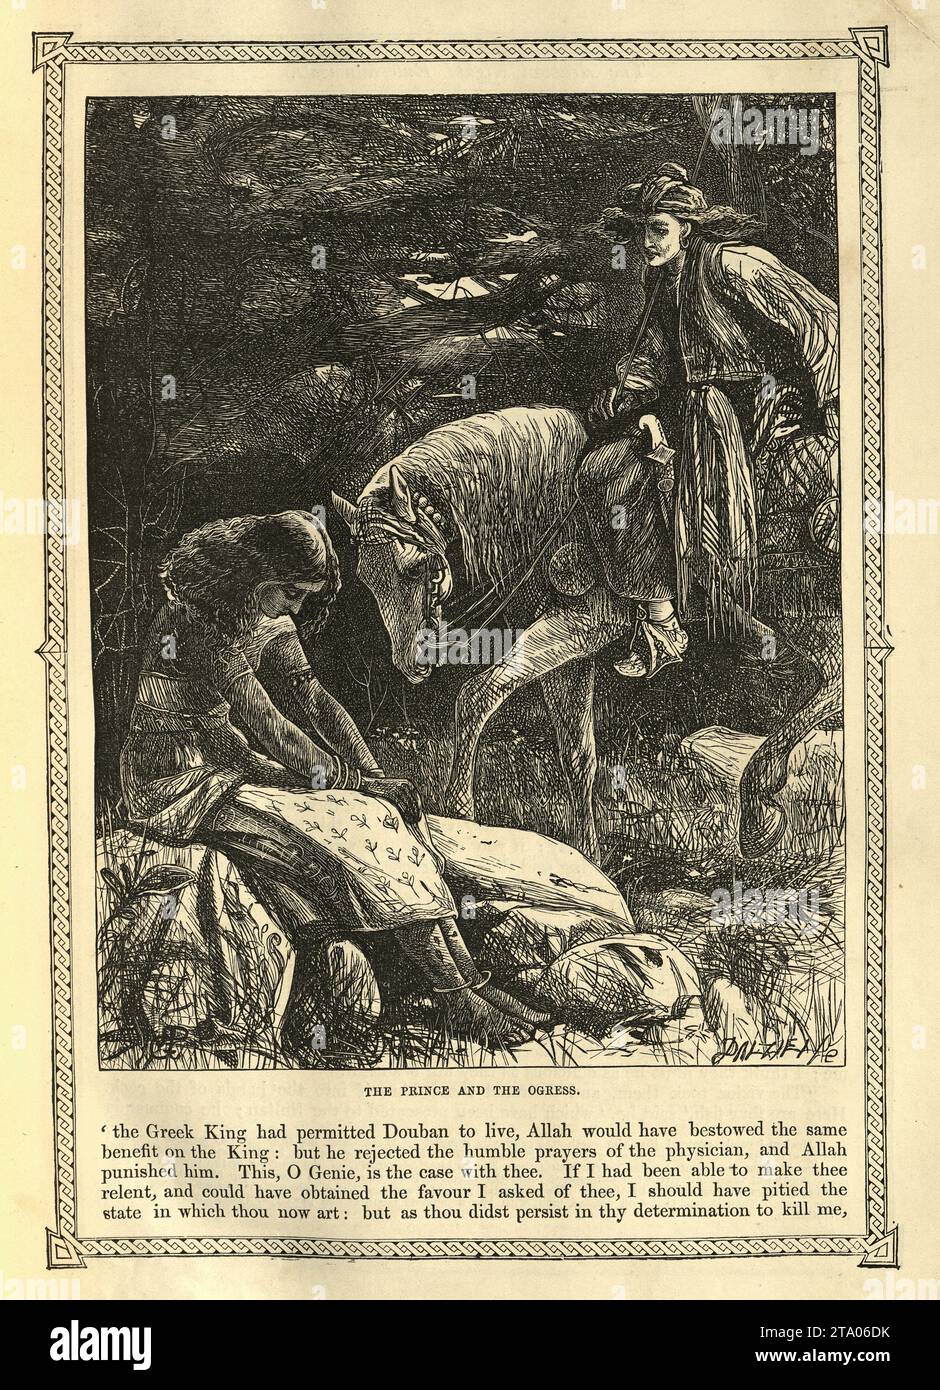 Vintage illustration One Thousand and One Nights, The Prince and the Ogress, Arabian, Middle Eastern folktales, by The Brothers Dalziel Stock Photo